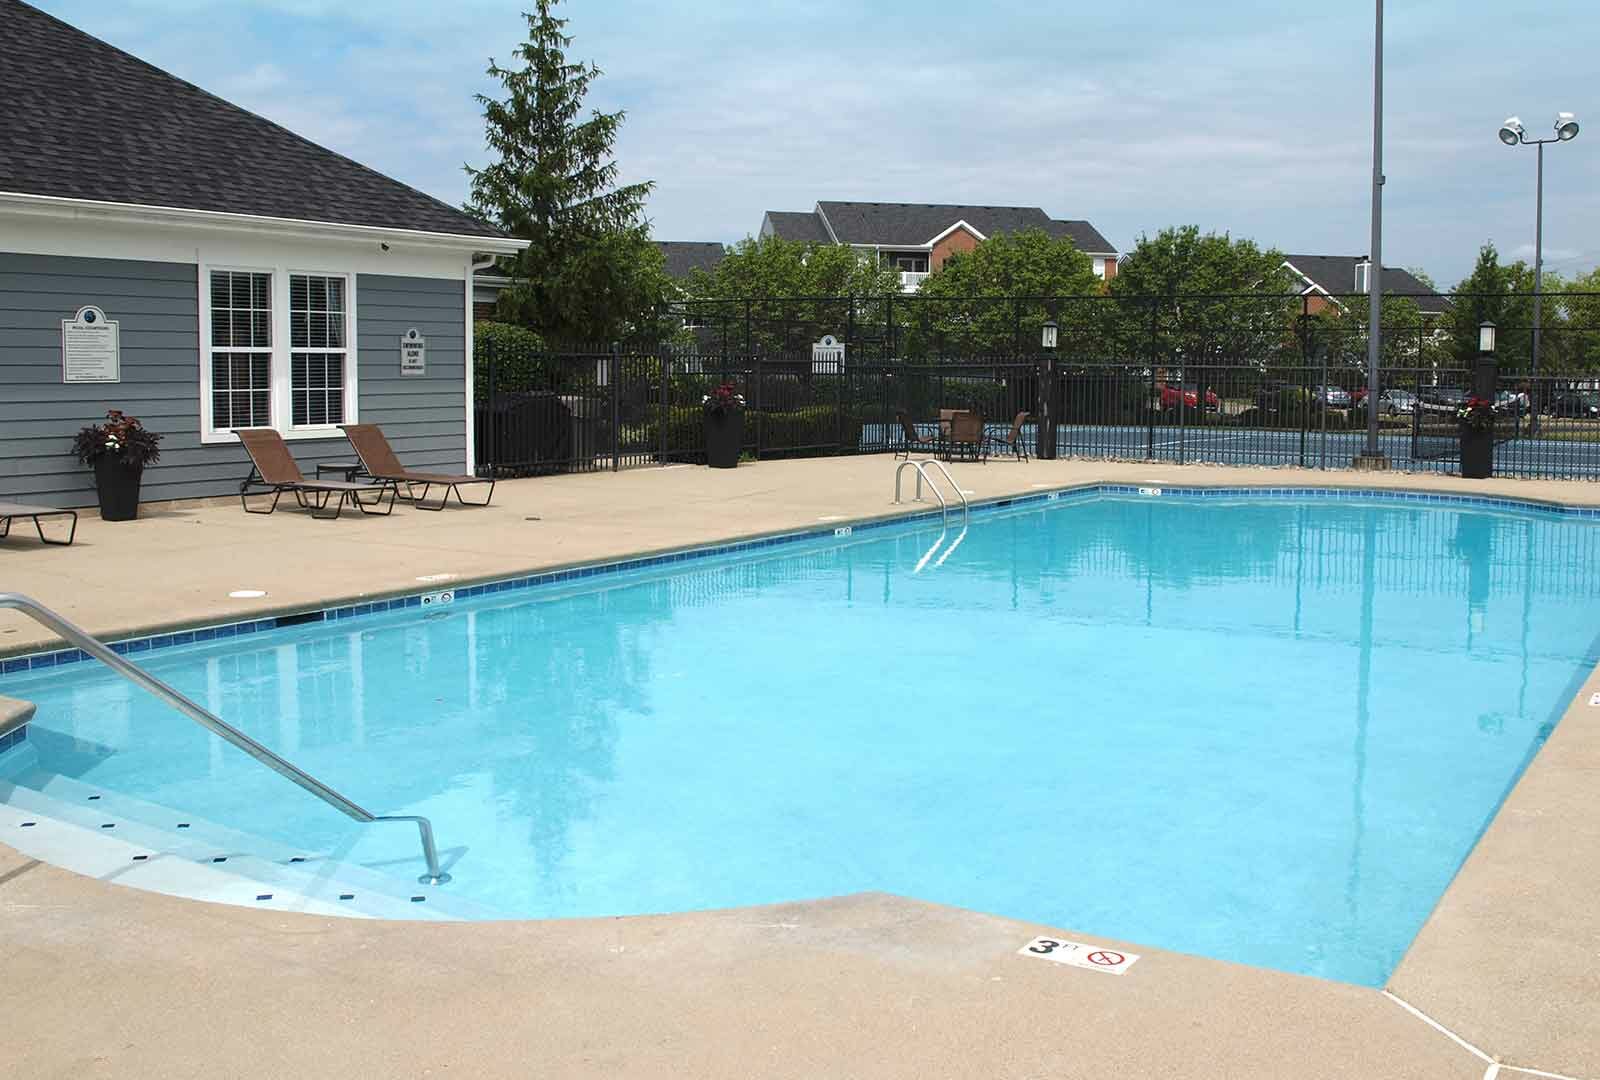 Outdoor pool and lounge deck at Sterling Lakes.